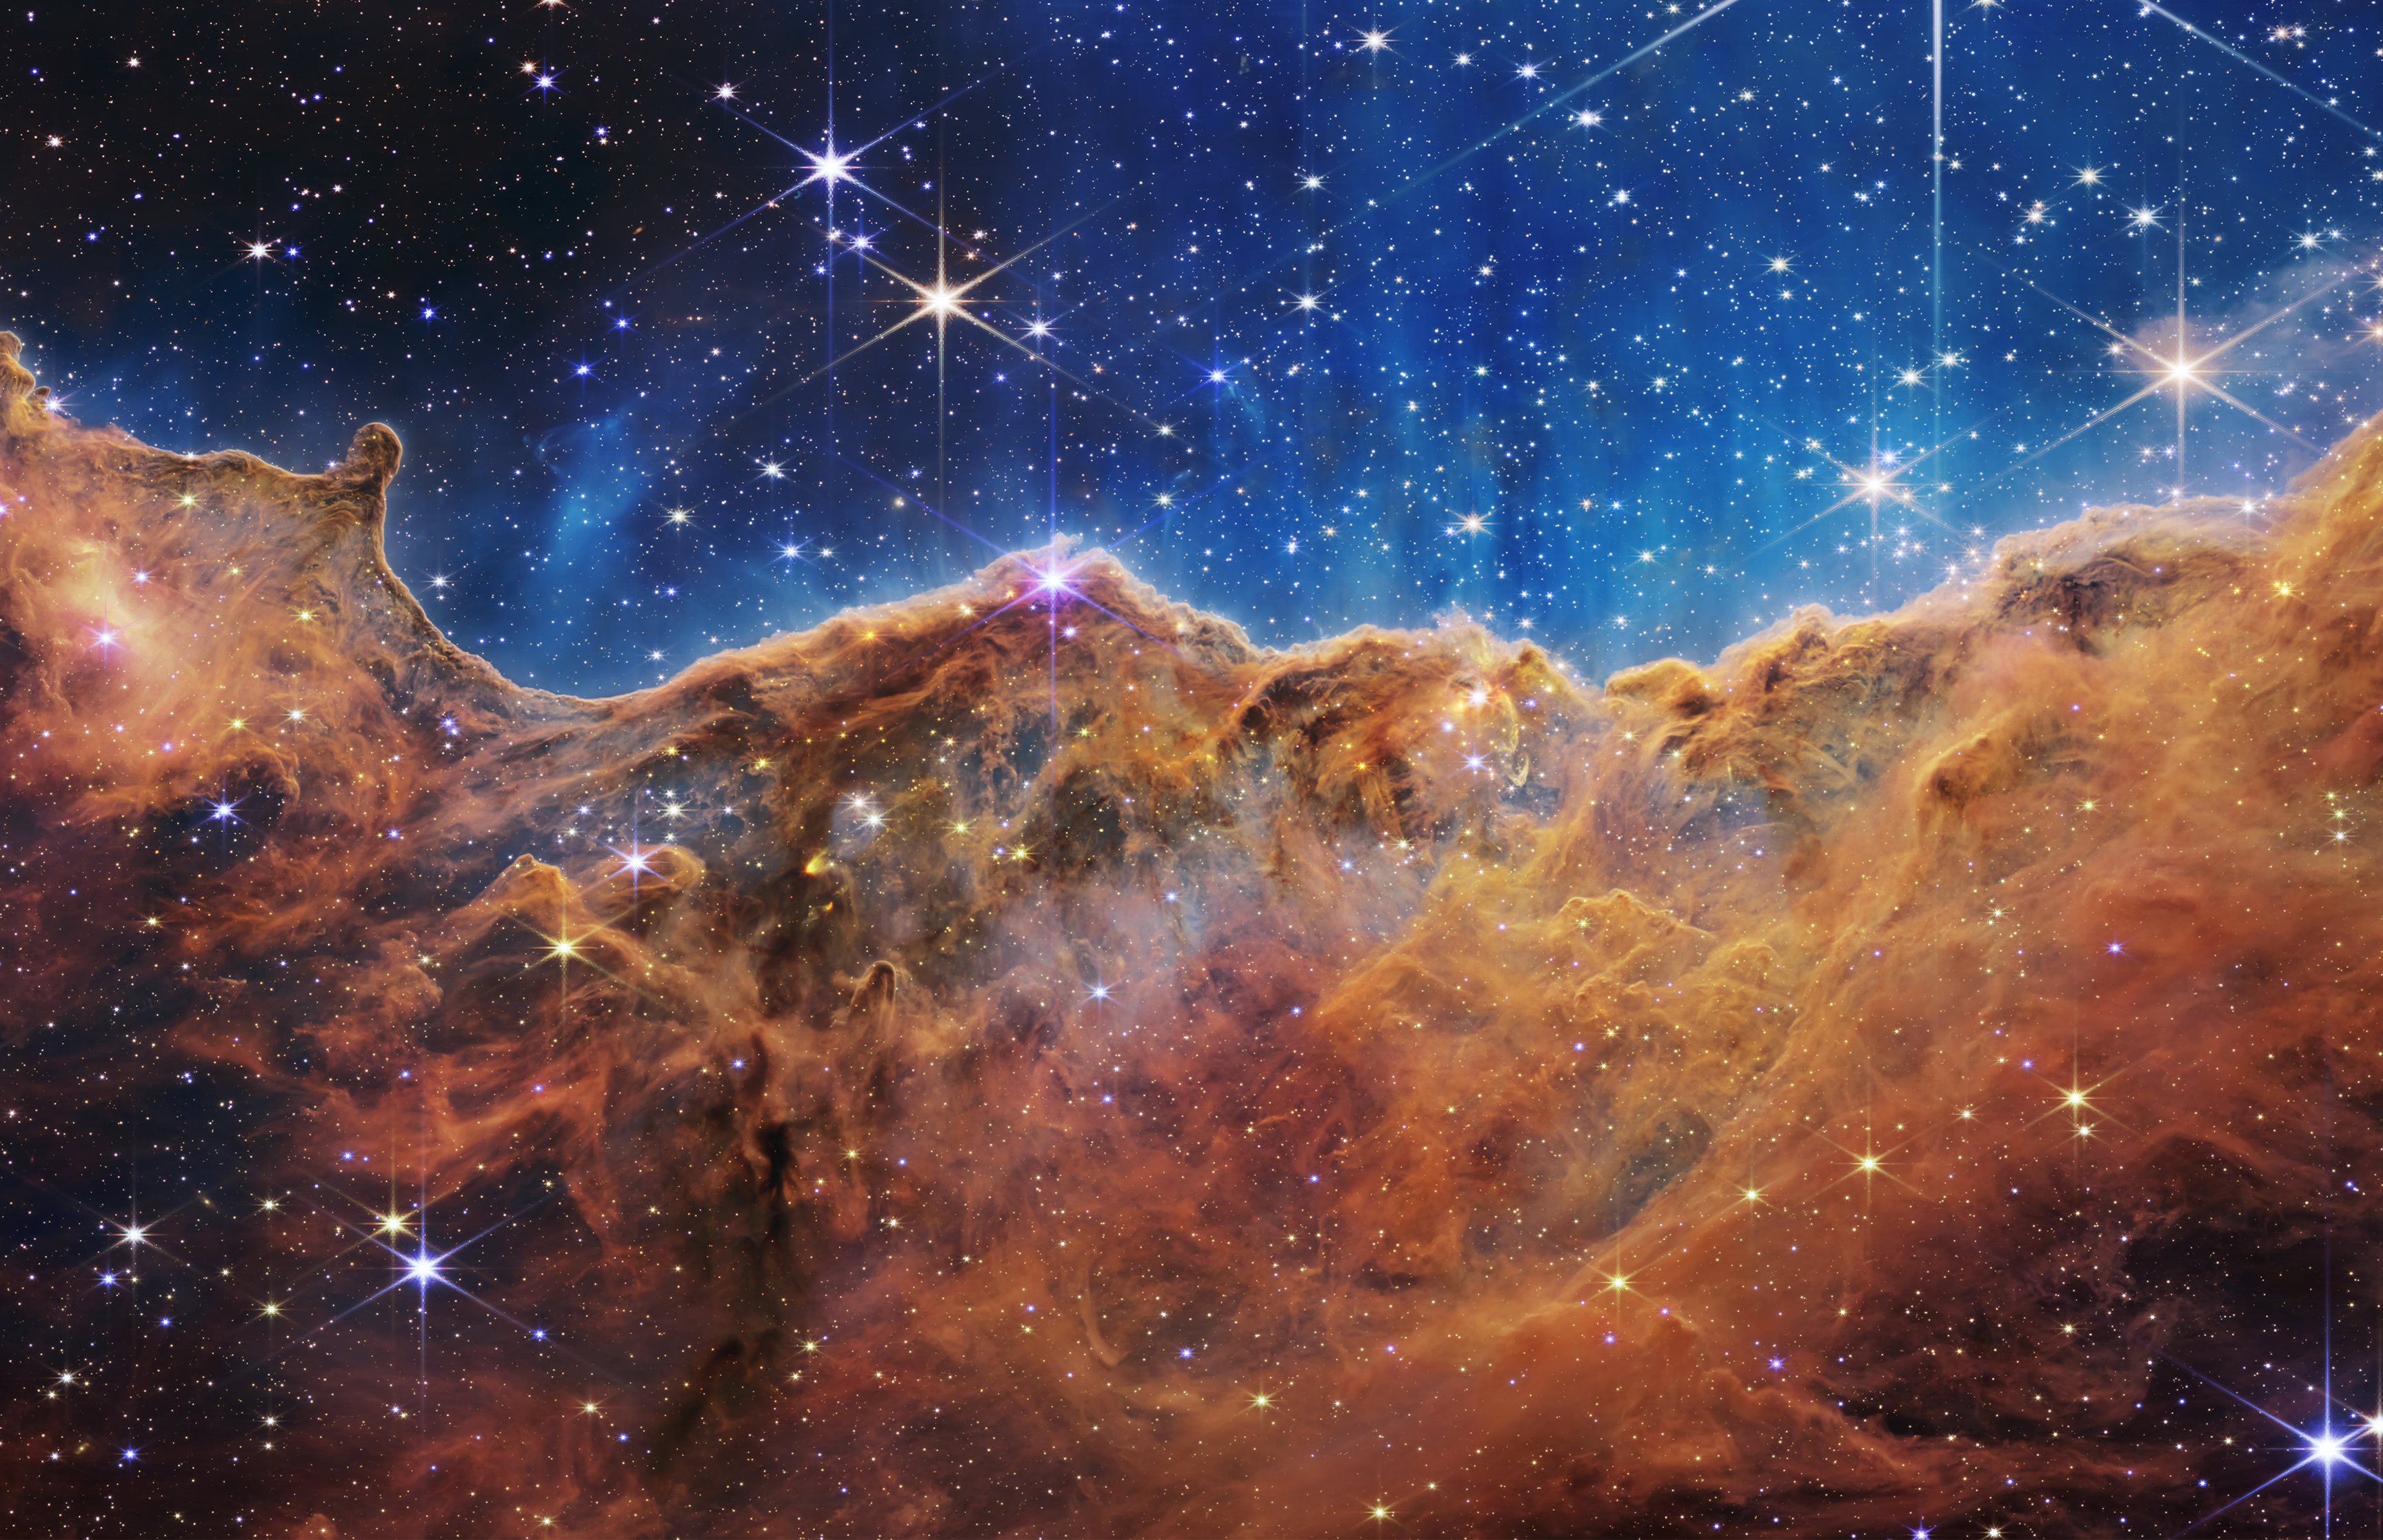 Desktop wallpapers from James Webb telescope — The Home Office Life